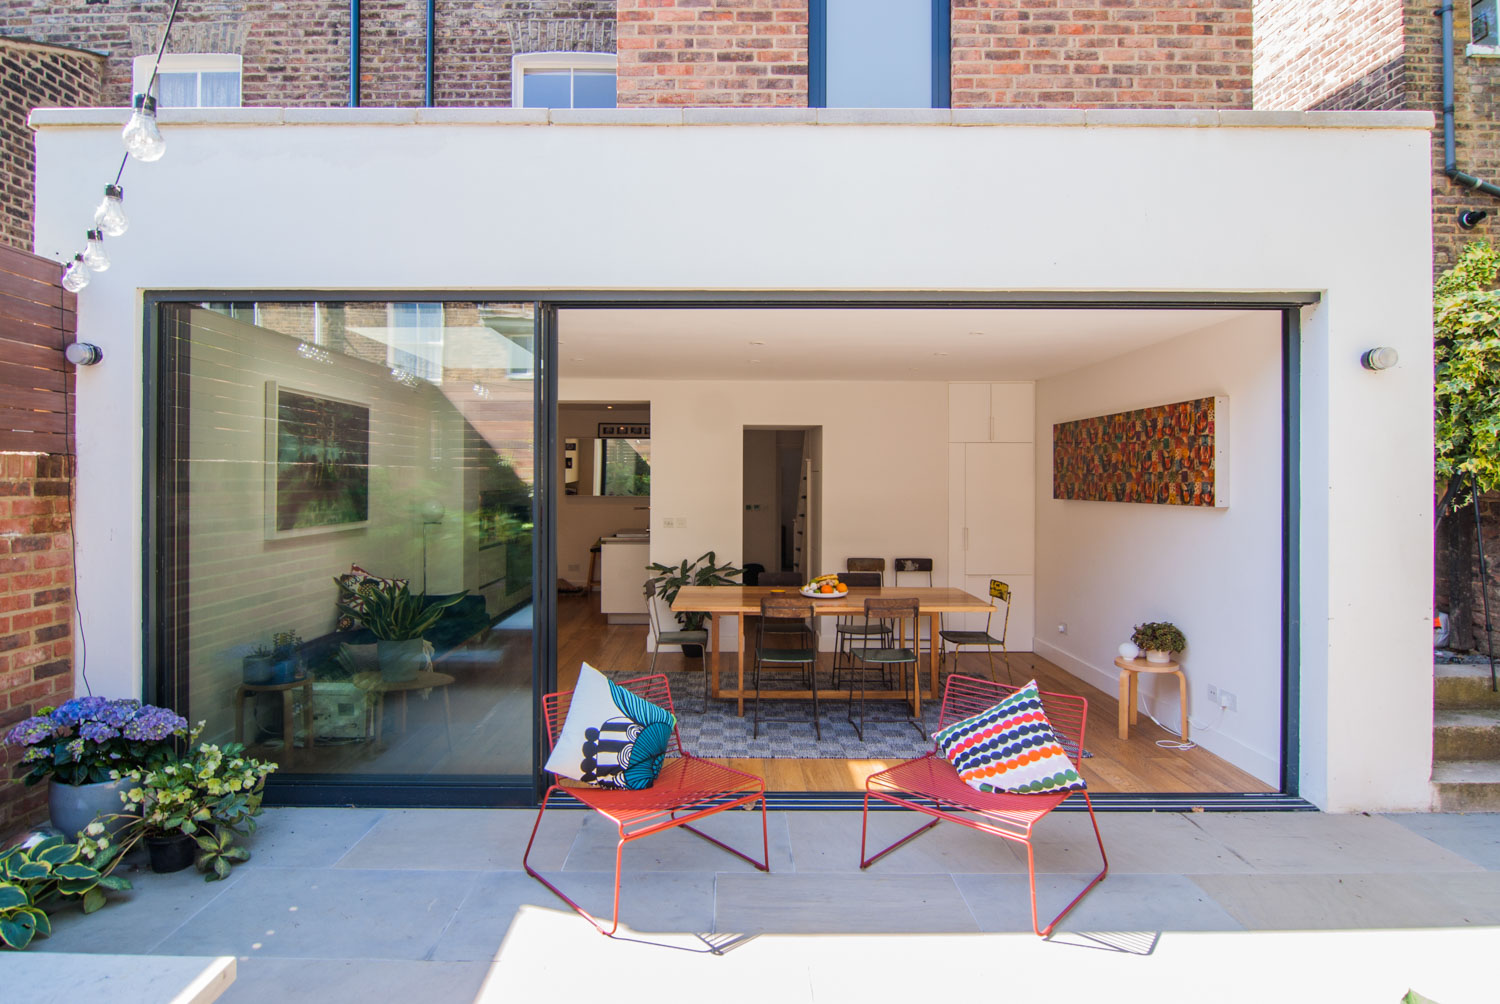 Rear extension including large sliding doors leading to an open and spacious dining area.